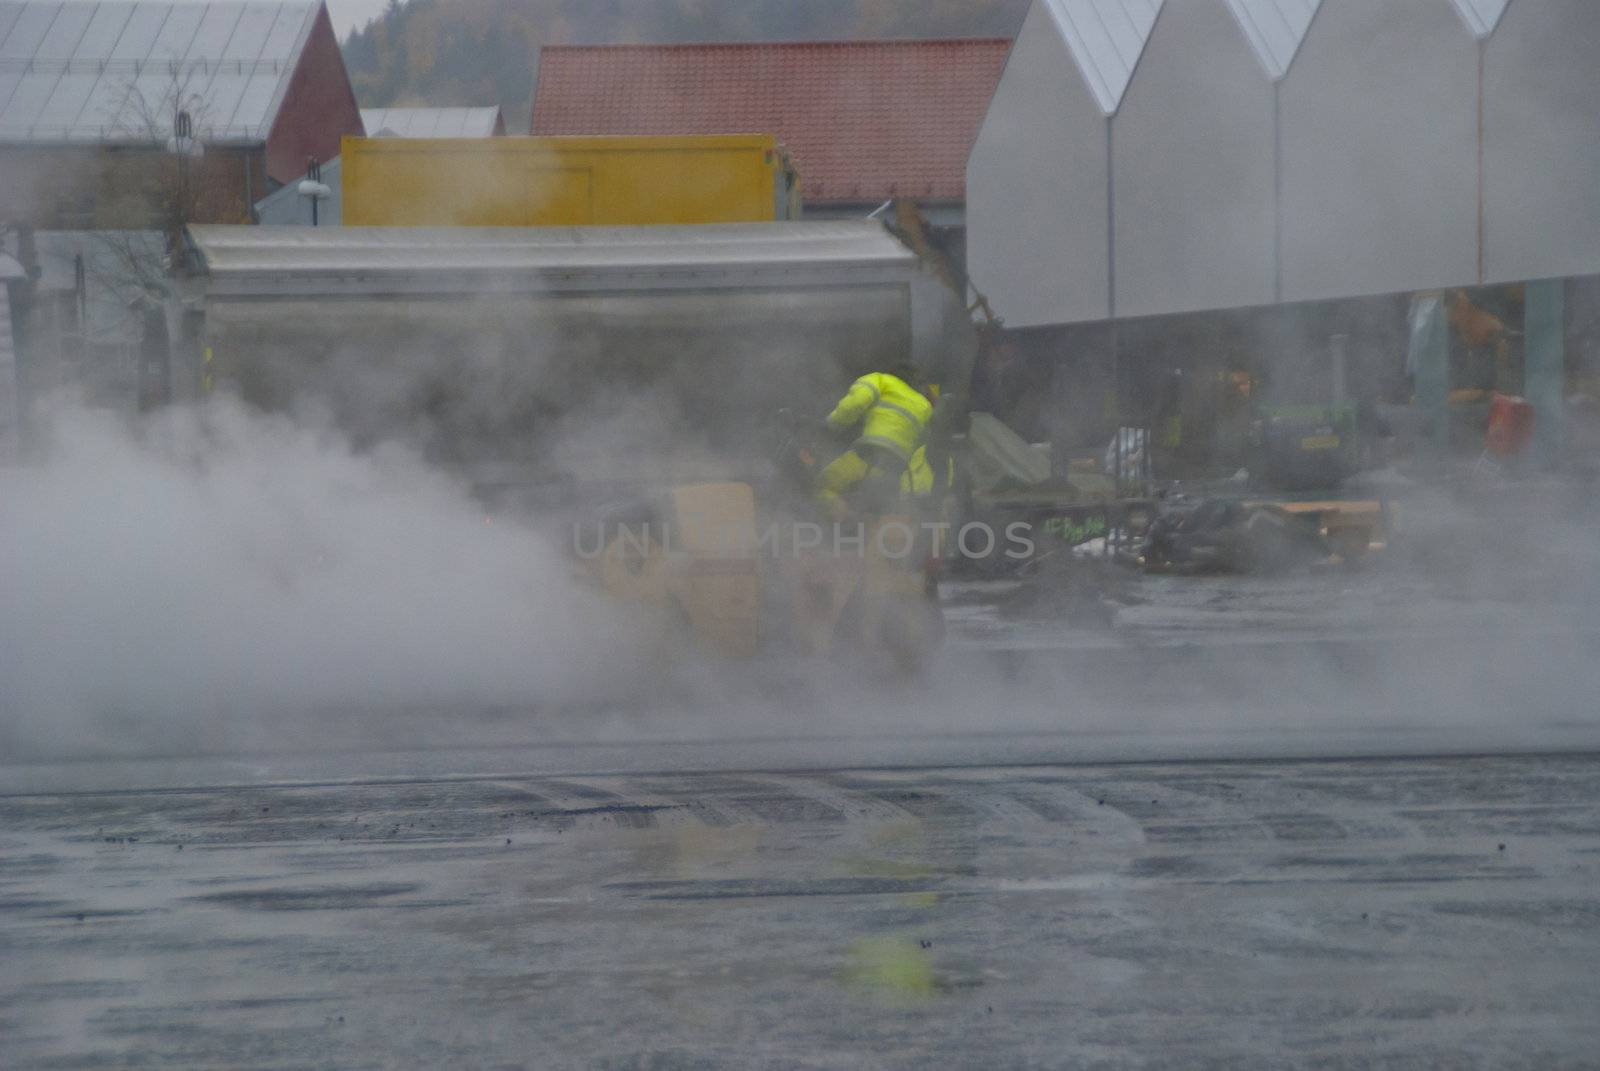 Close to Tista shopping center in Halden is it currently high activity by adding new asphalt on parking spaces, image was shot when it rained, so there was a lot of smoke.